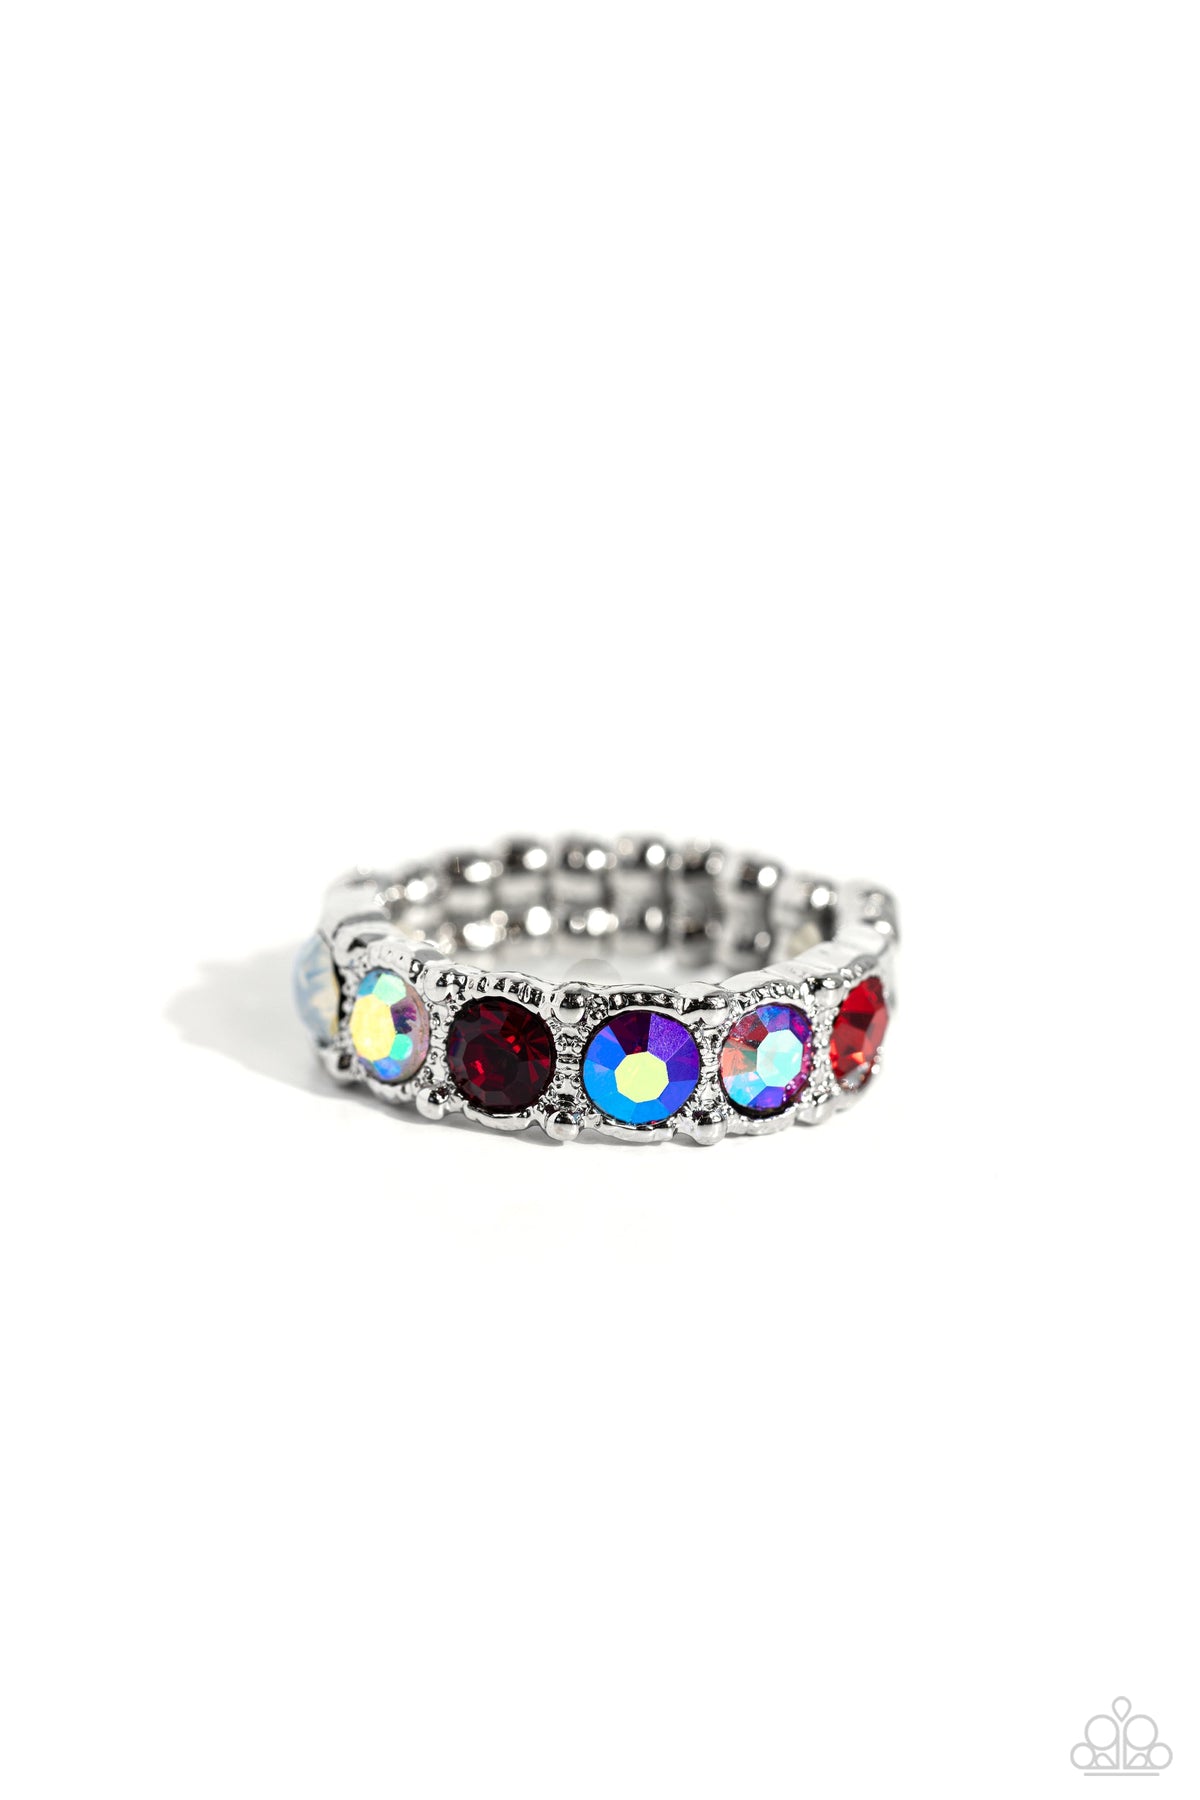 Taming Twilight Red, Iridescent &amp; Opal Rhinestone Ring - Paparazzi Accessories- lightbox - CarasShop.com - $5 Jewelry by Cara Jewels